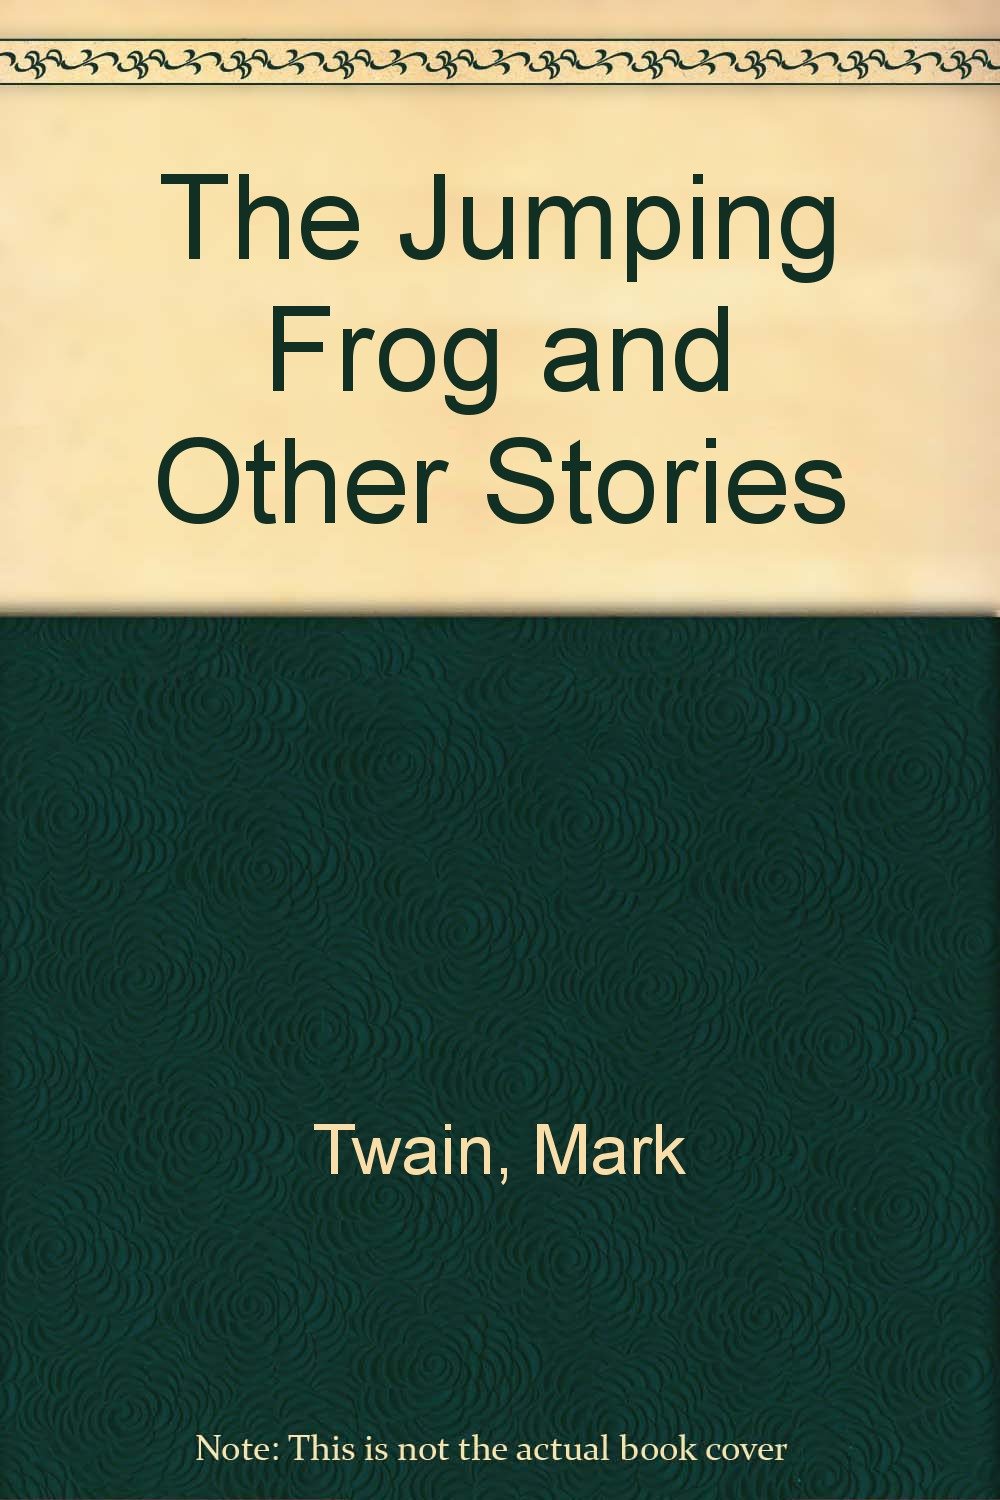 The jumping frog and other stories magazine reviews